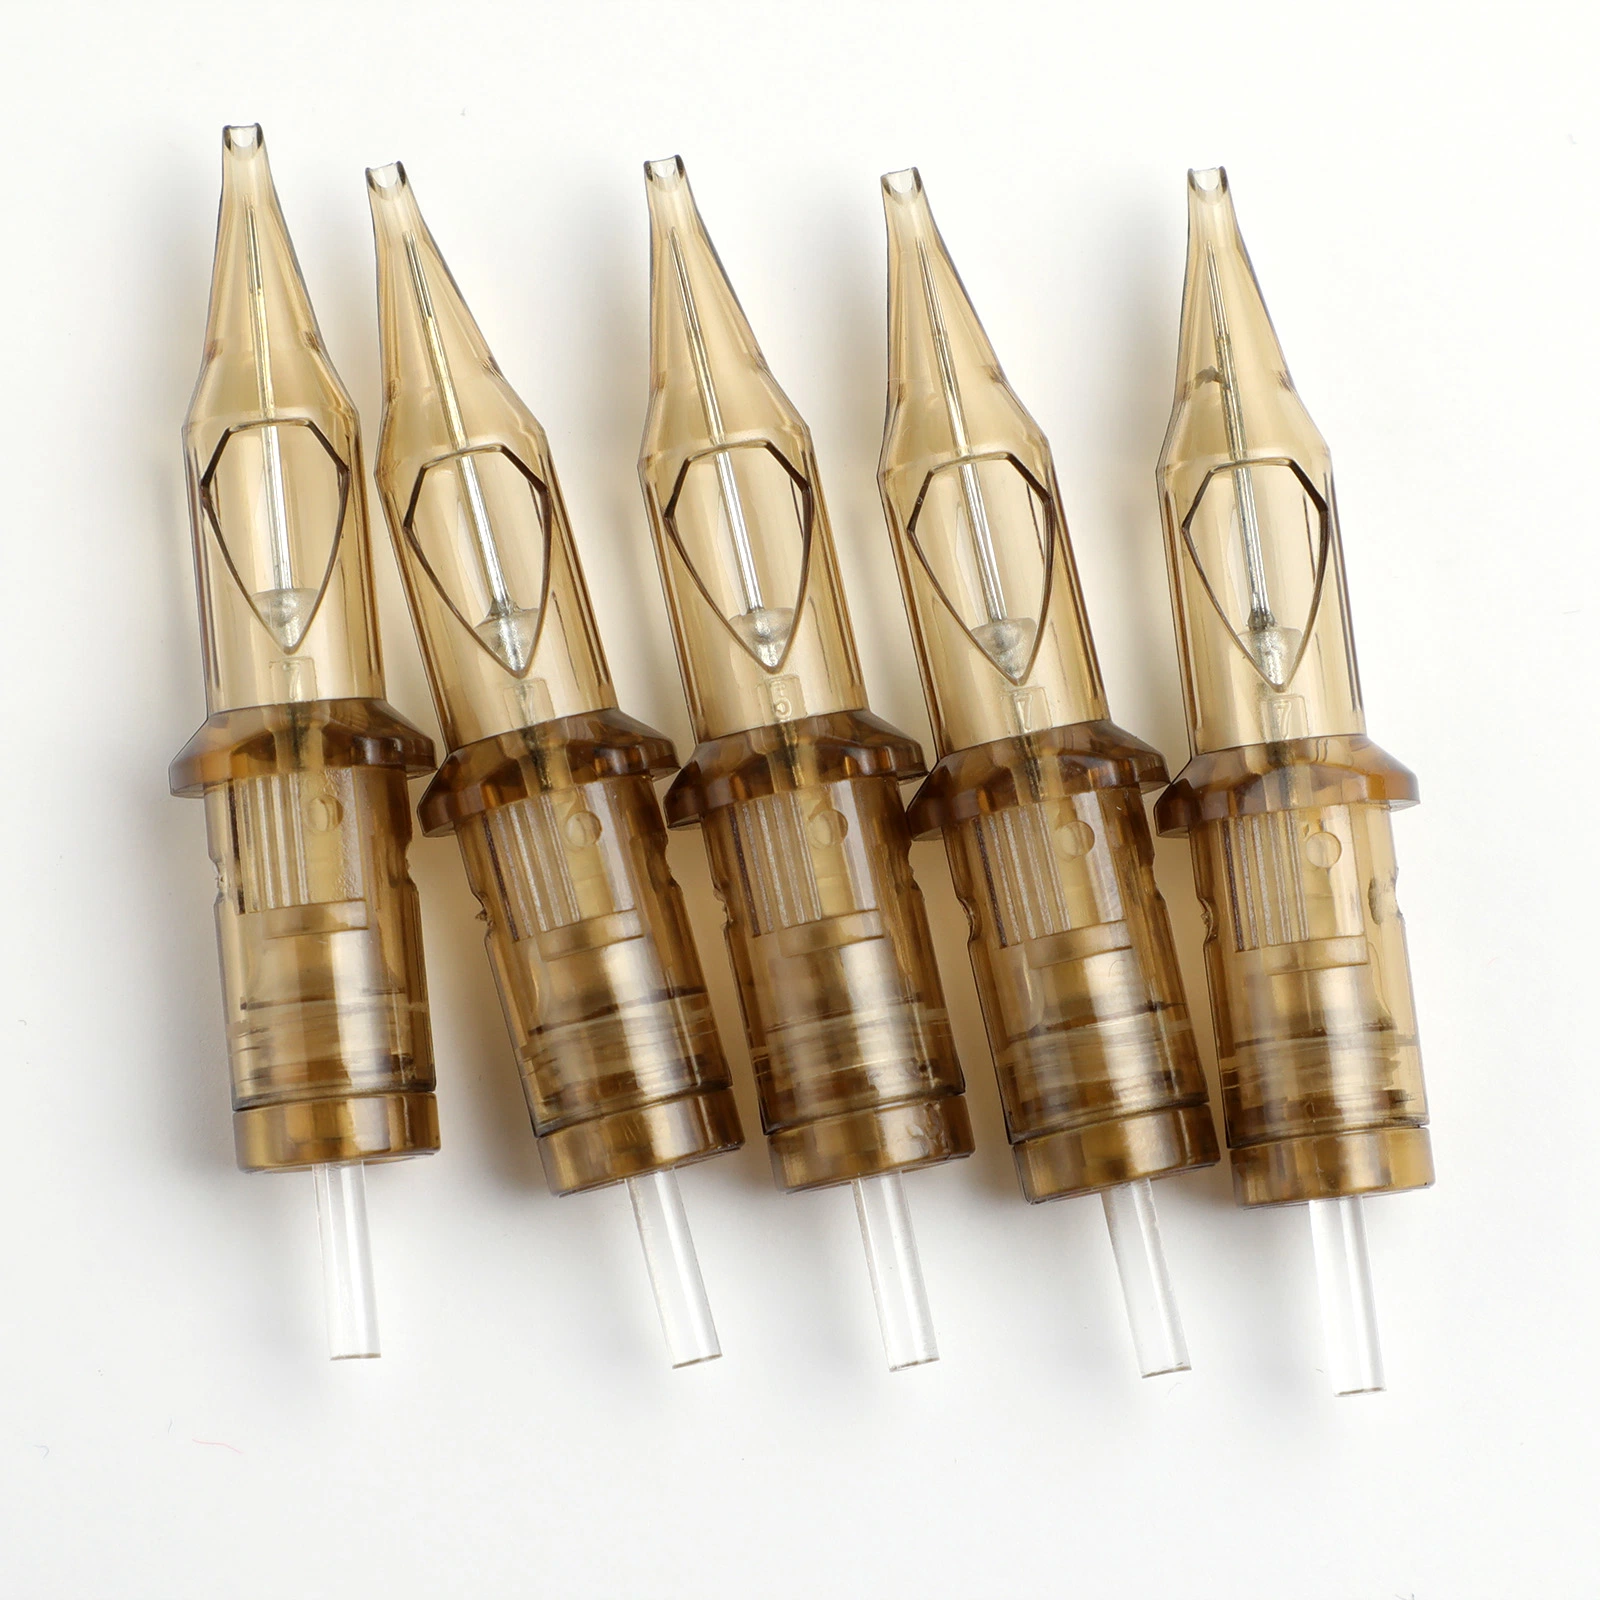 Wholesale Professional Tattoo Needles Rl RS Eo Gas Disposable Sterilized Tattoo cartridge for Body Art